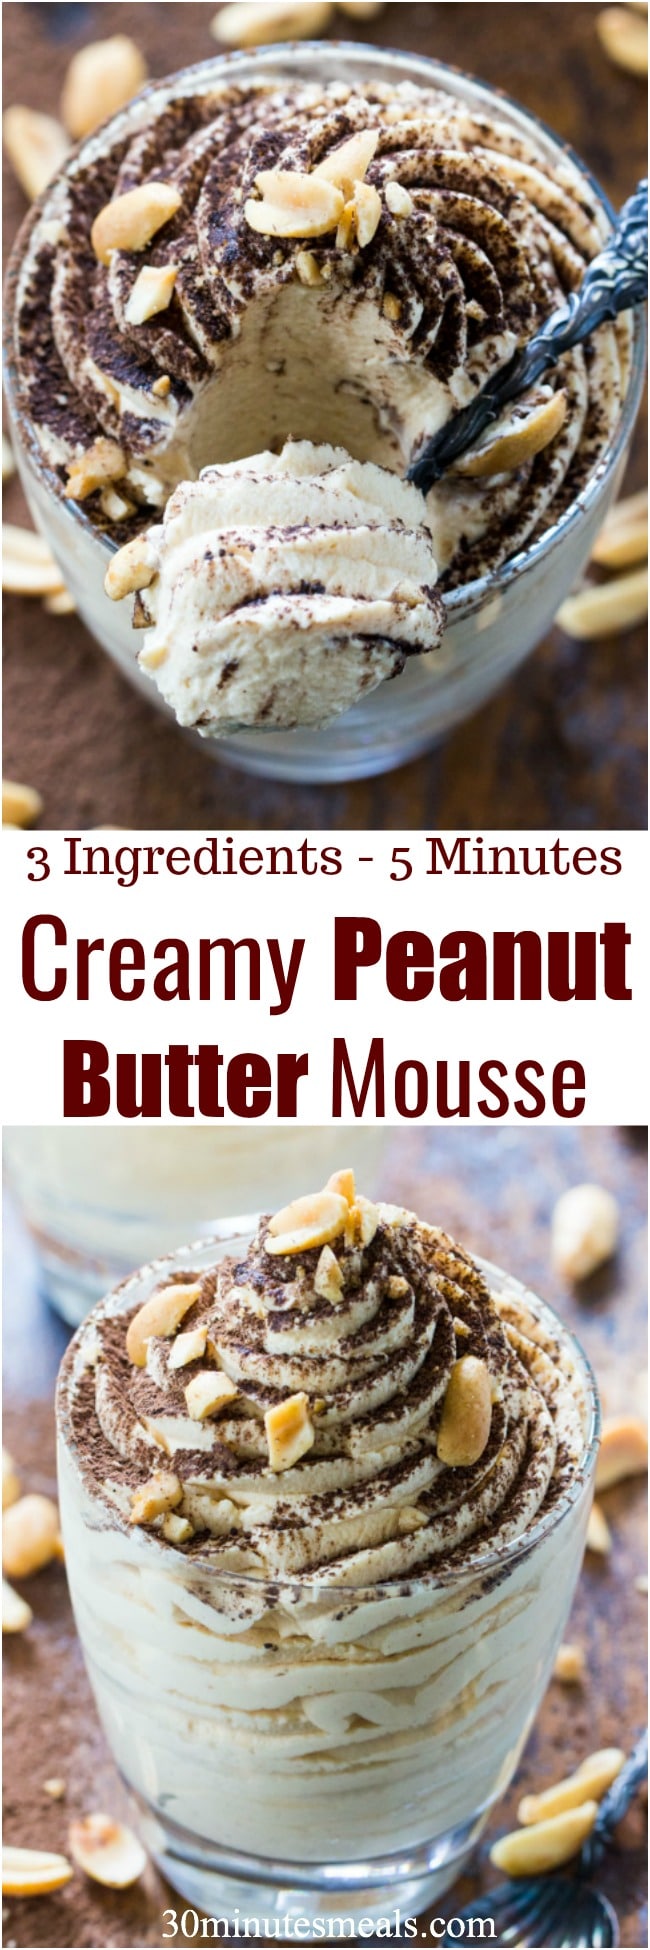 Creamy Peanut Butter Mousse is made with just 3 ingredients in less than 5 minutes. Perfect to fix a quick peanut butter craving!